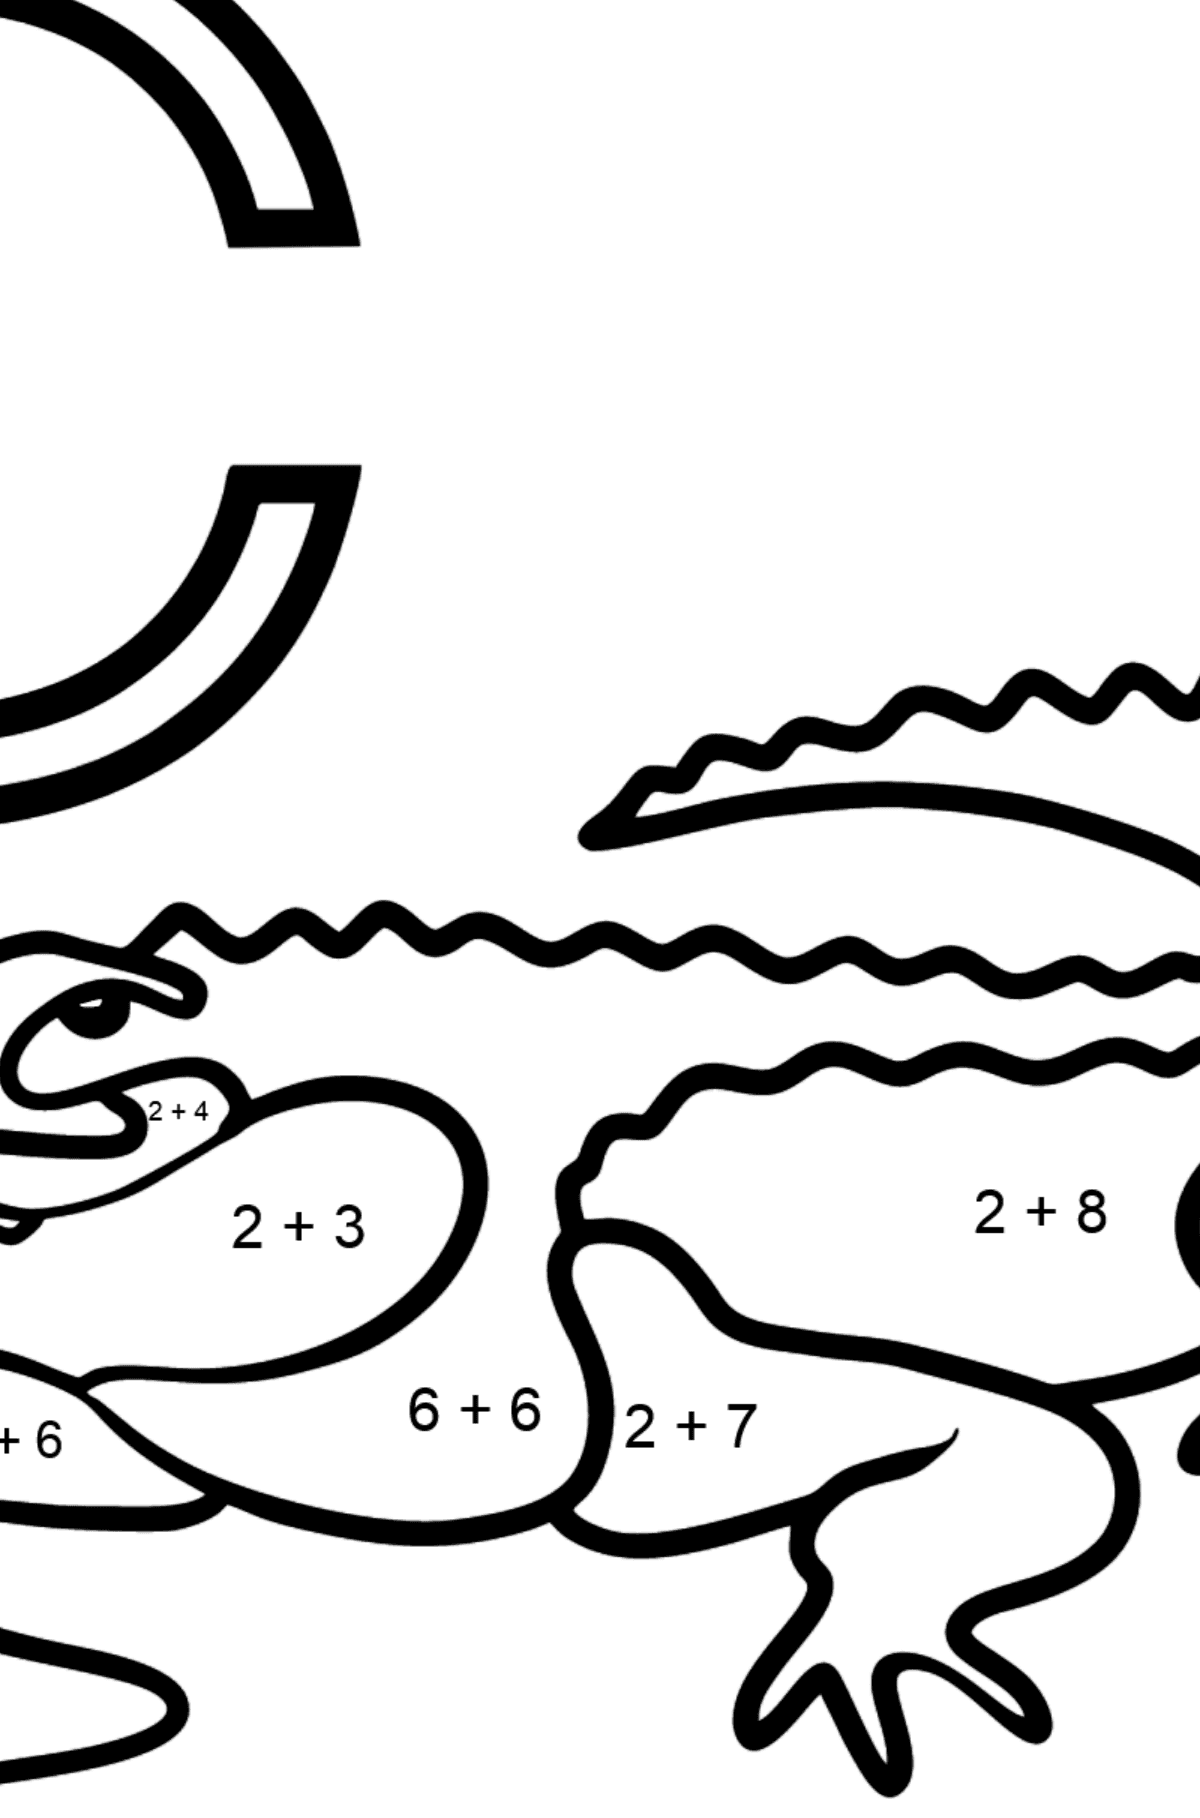 Spanish Letter C coloring pages - COCODRILO - Math Coloring - Addition for Kids